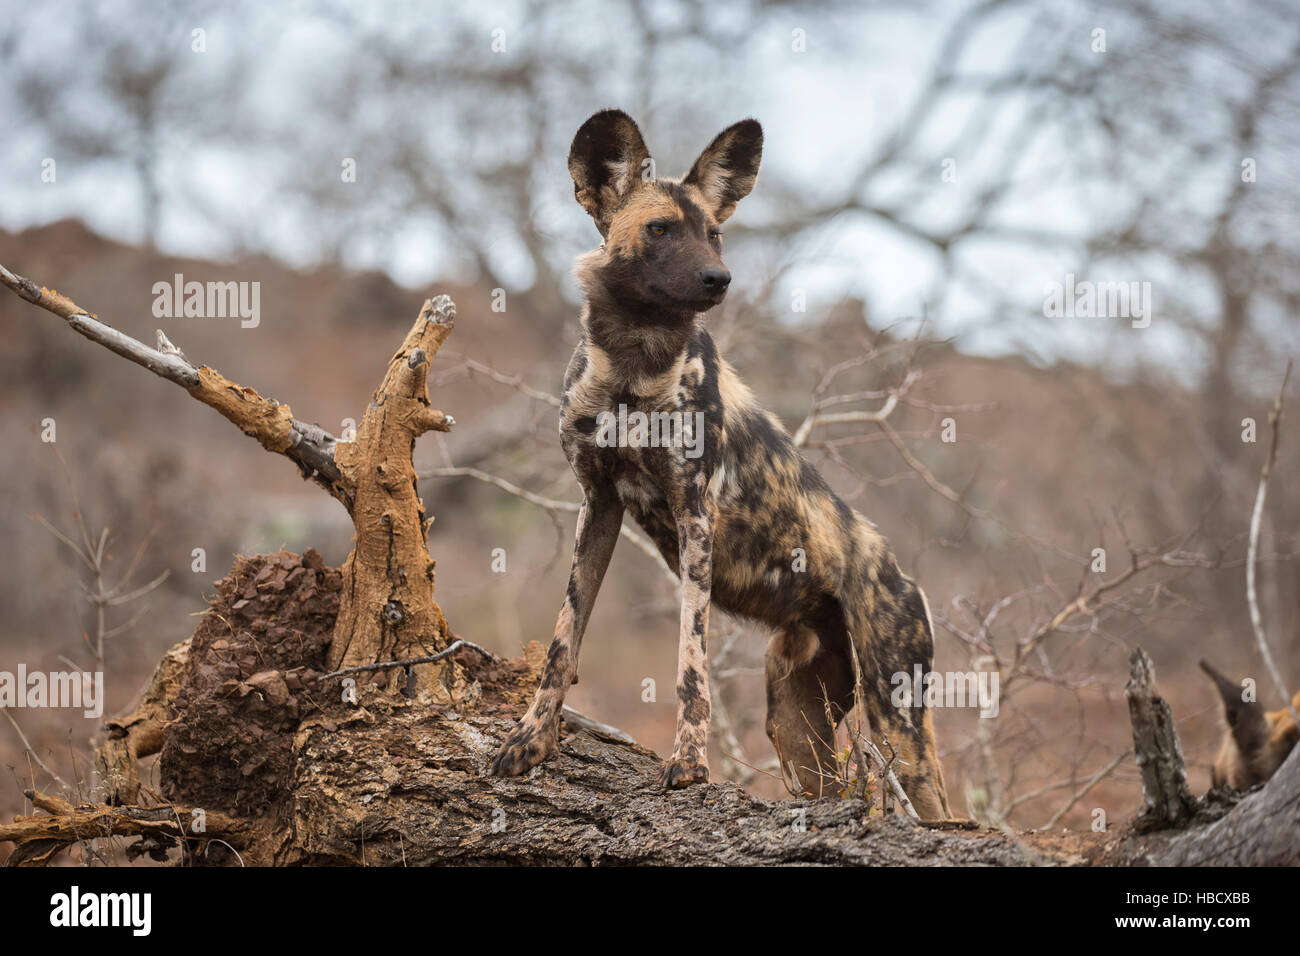 African wild dog (Lycaon pictus), Zimanga private game reserve, KwaZulu-Natal, South Africa Stock Photo